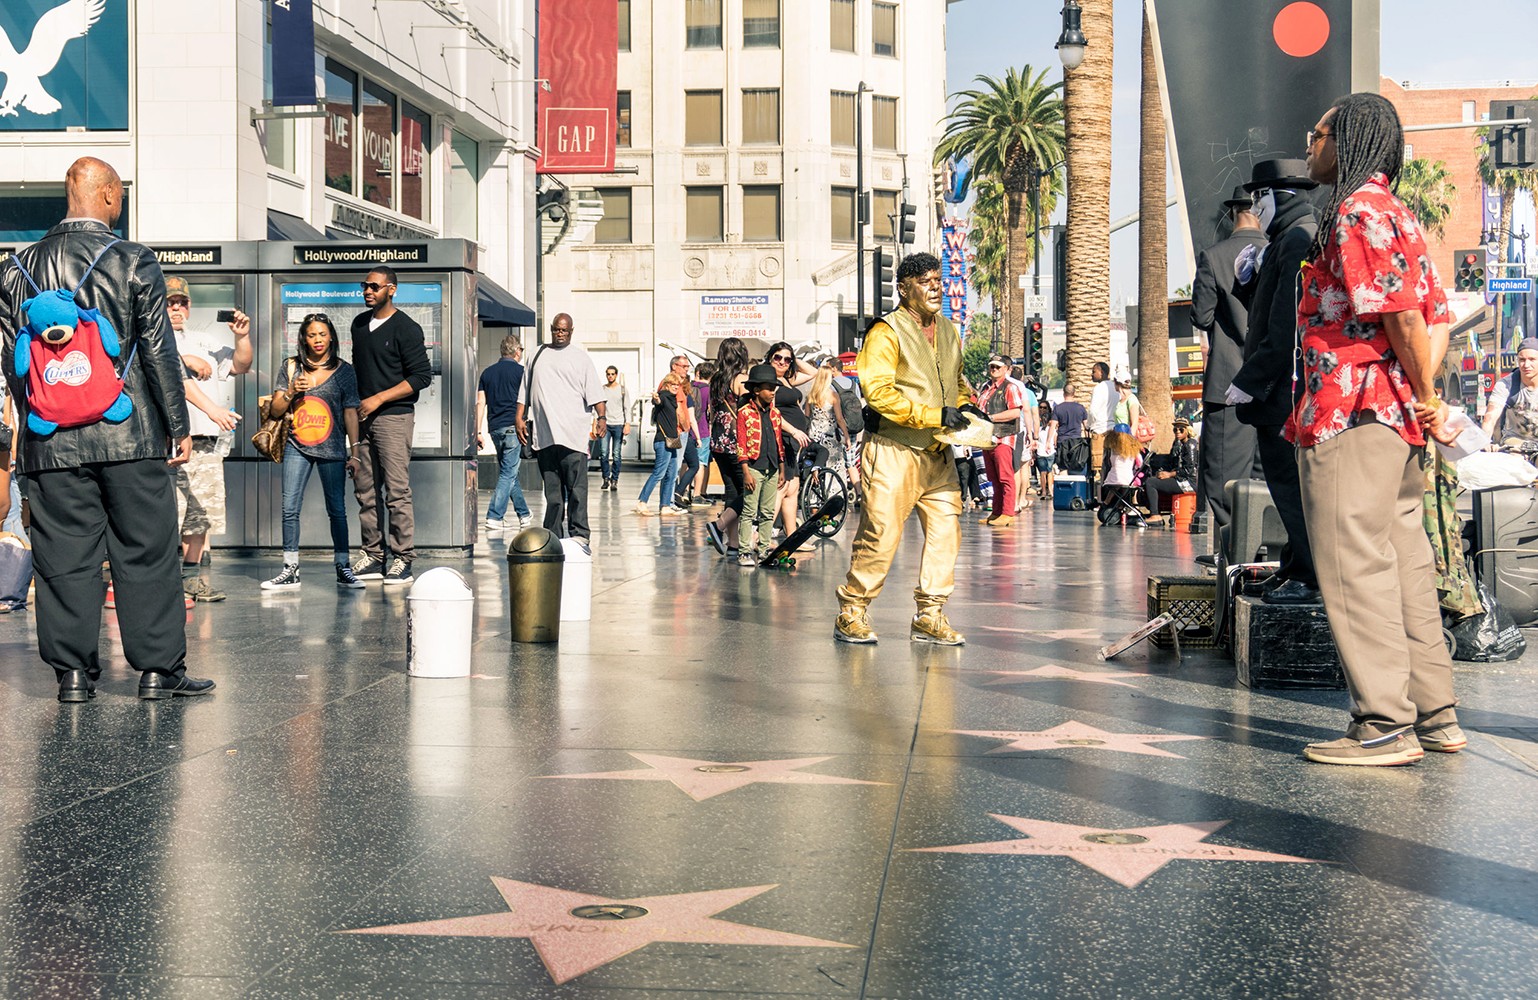 Free things to do in Los Angeles - Hollywood Walk of Fame featured by popular Los Angeles Blogger, My Beauty Bunny